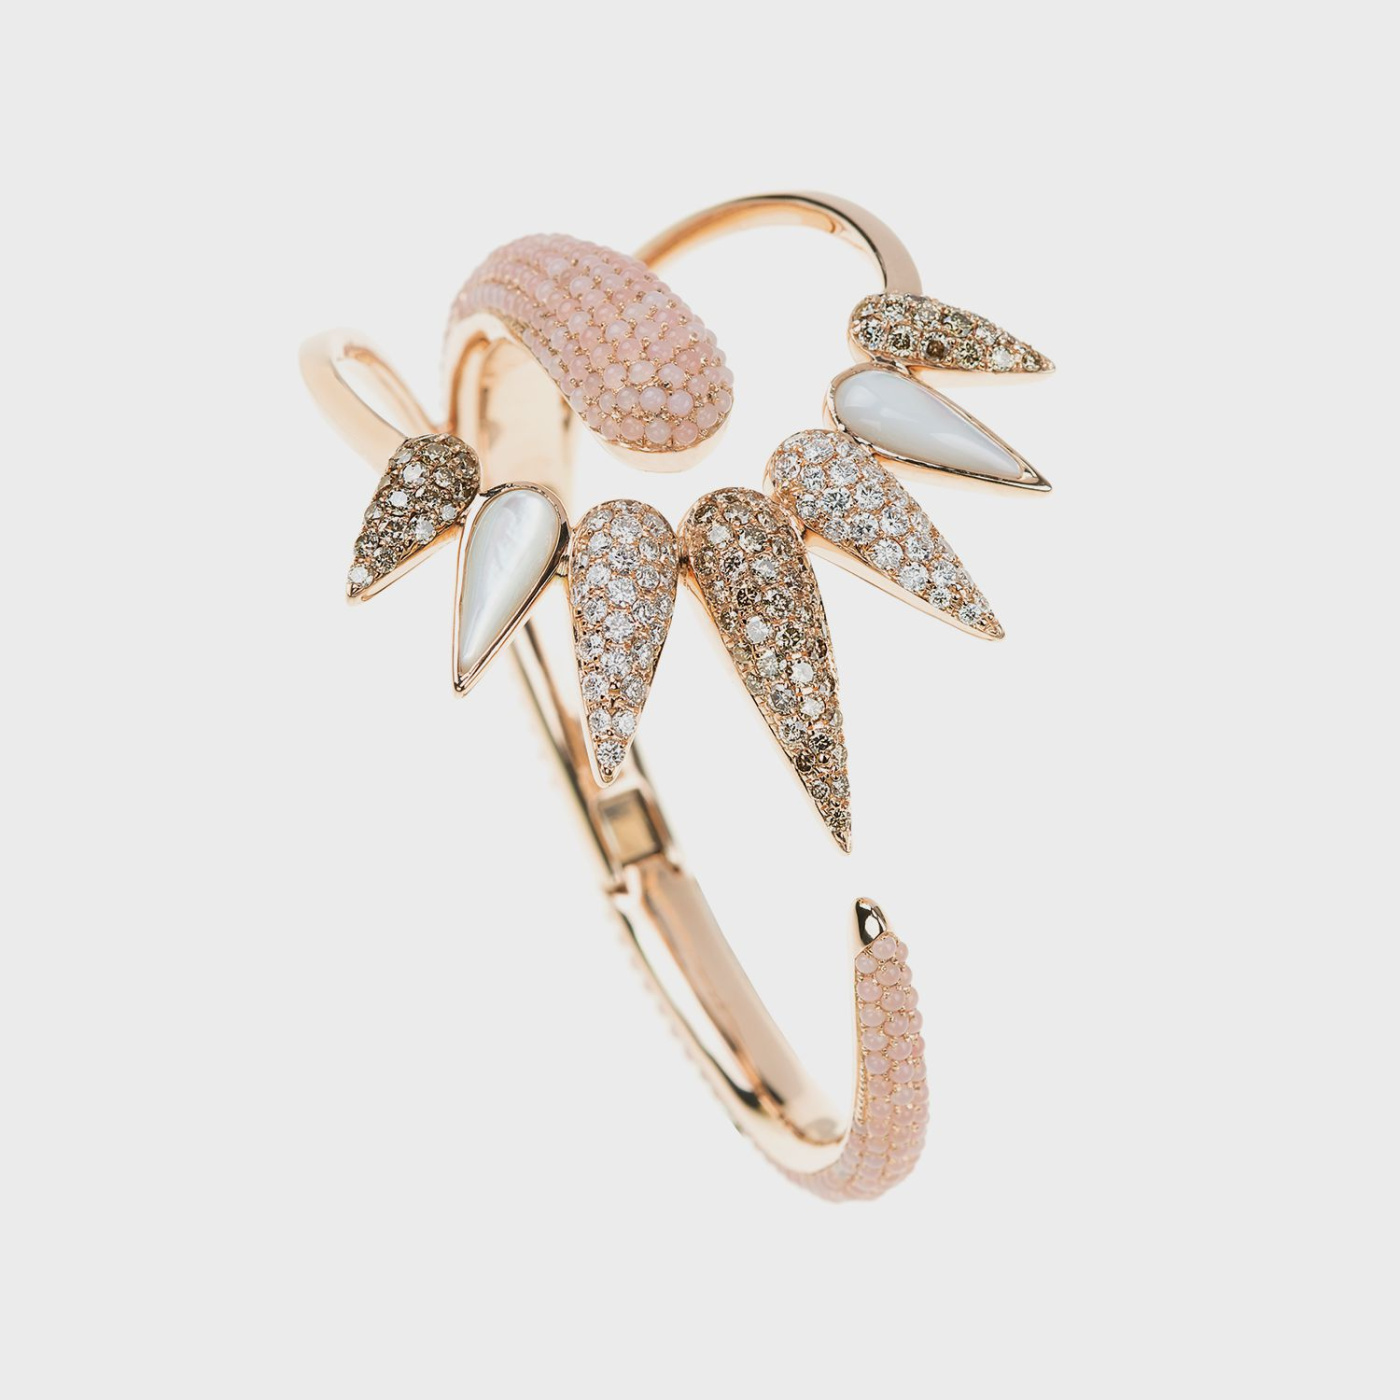 Rose gold cuff bracelet with white diamonds, brown diamonds, pink topazes and mother of pearl